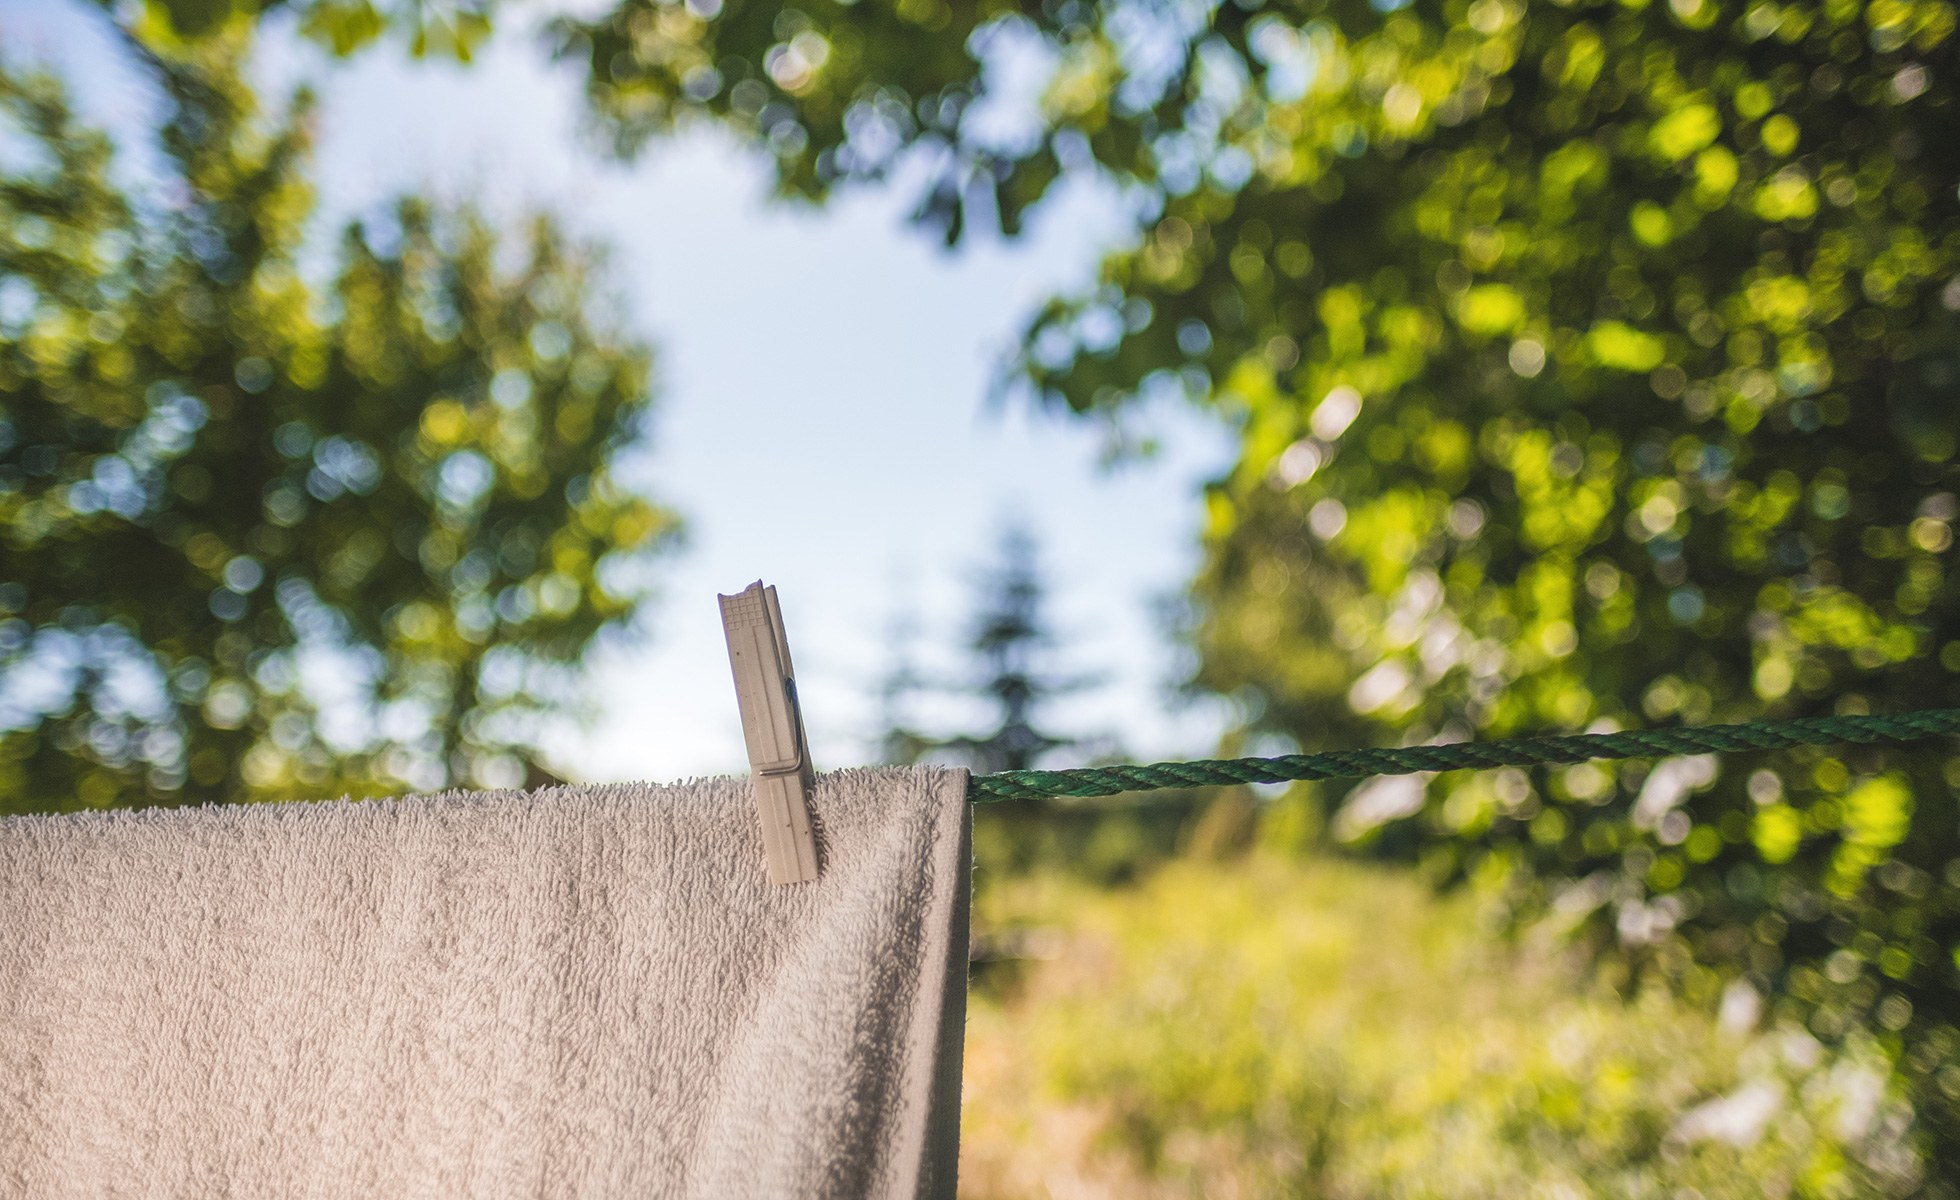 A towel drying on the clothes line outside.